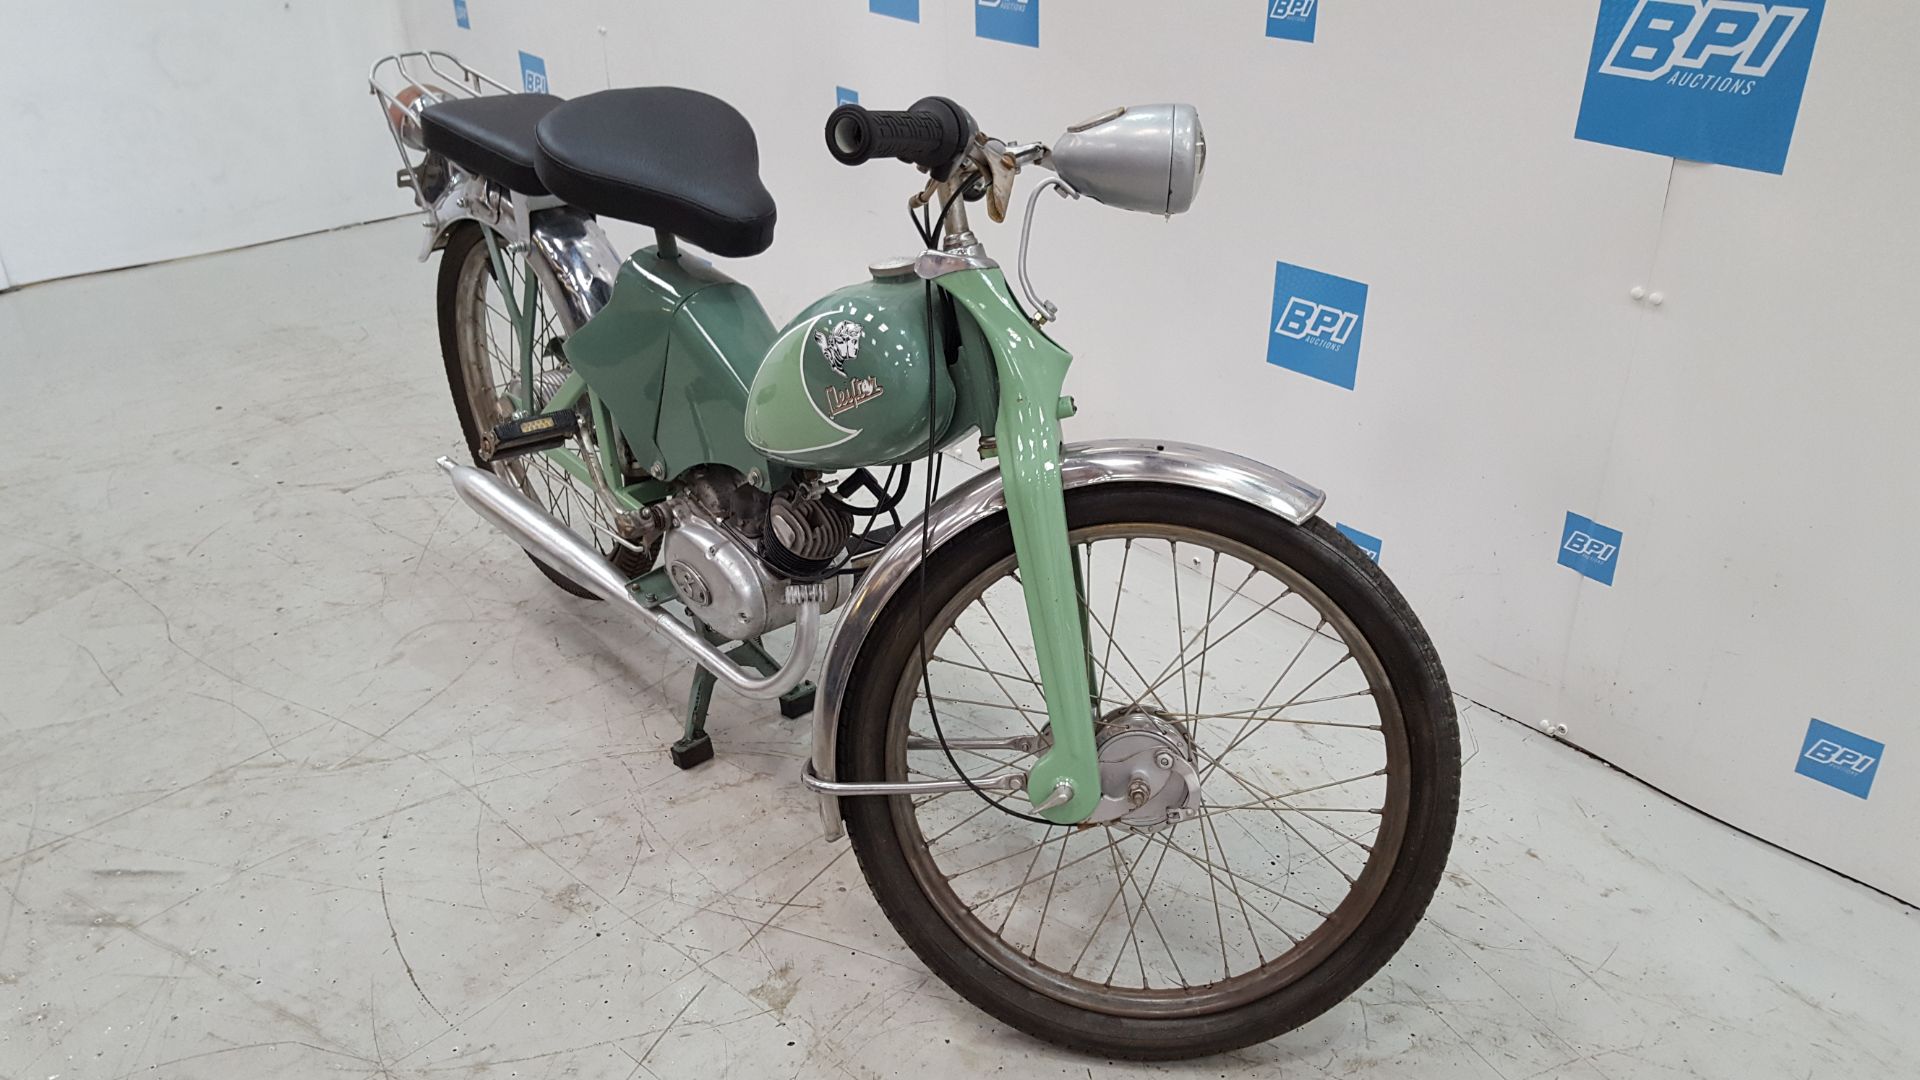 1955 Meister Moped 50cc - Image 2 of 10